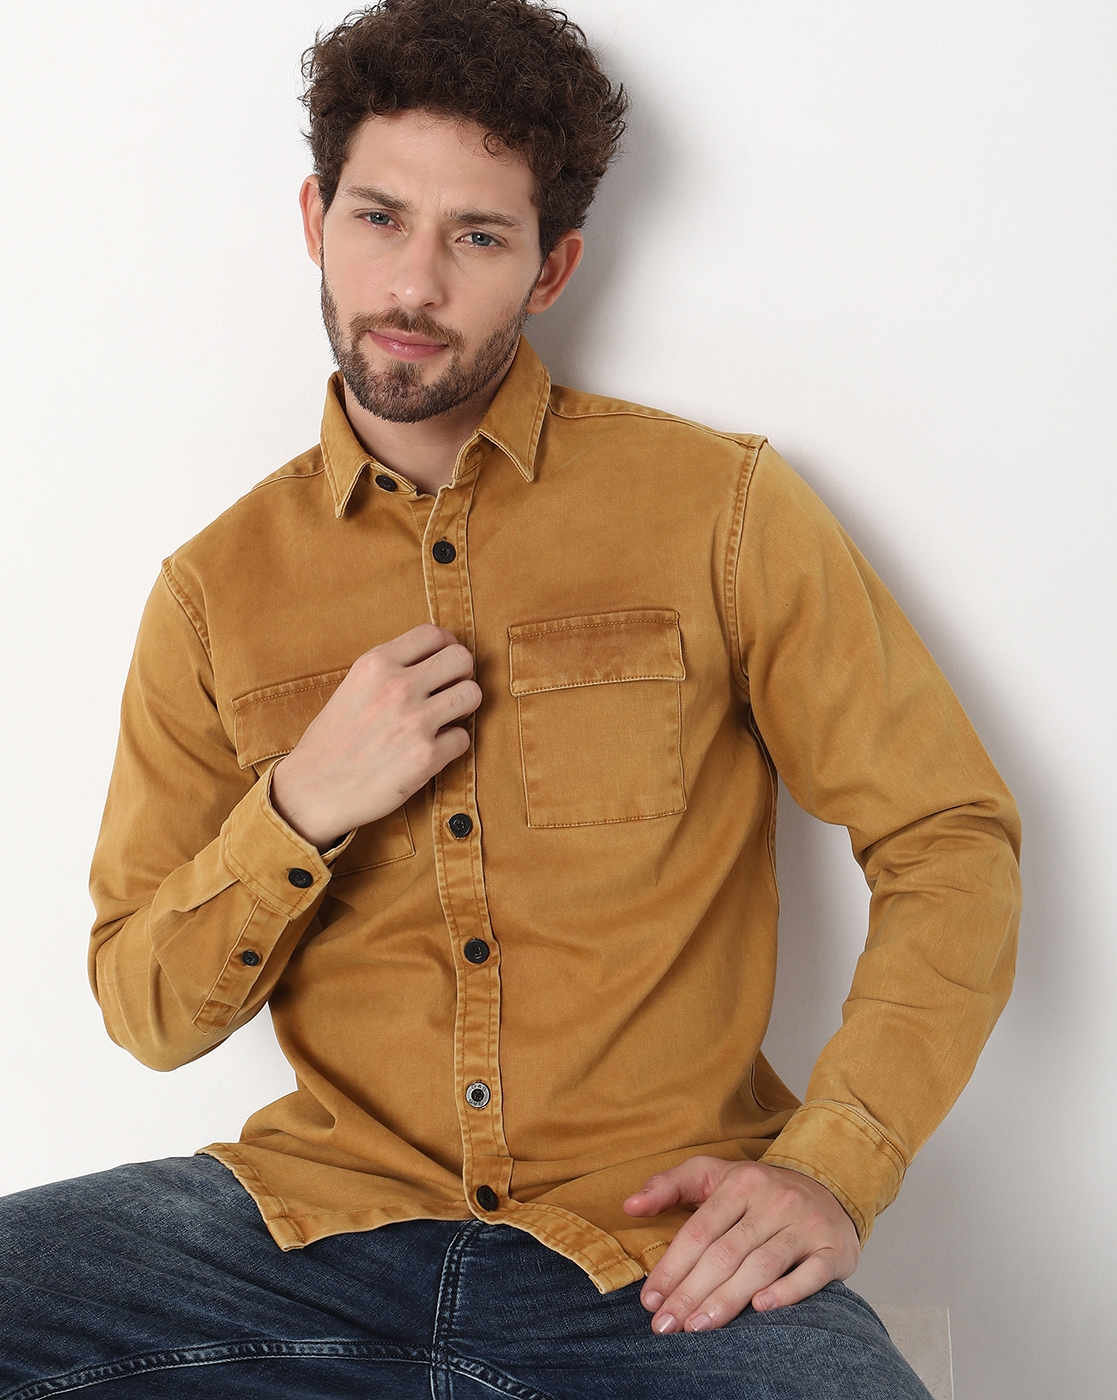 Plain Brown BRANDED DENIM SHIRTS WHOLESALE, Slim Fit at Rs 410 in Hyderabad